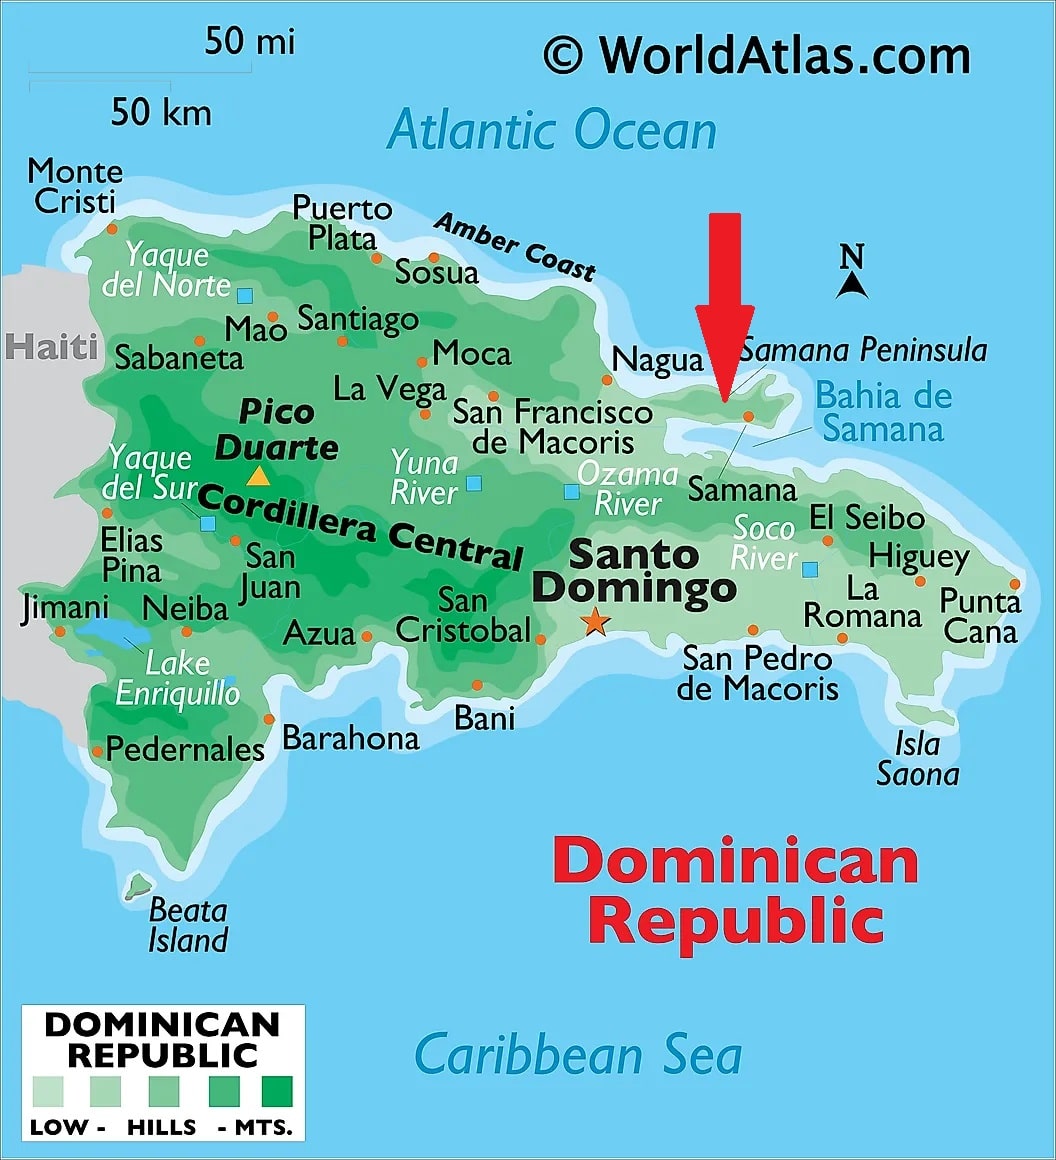 Drawn map of Dominican Republic with large red arrow pointing to Samana which is located in the north east of the country.